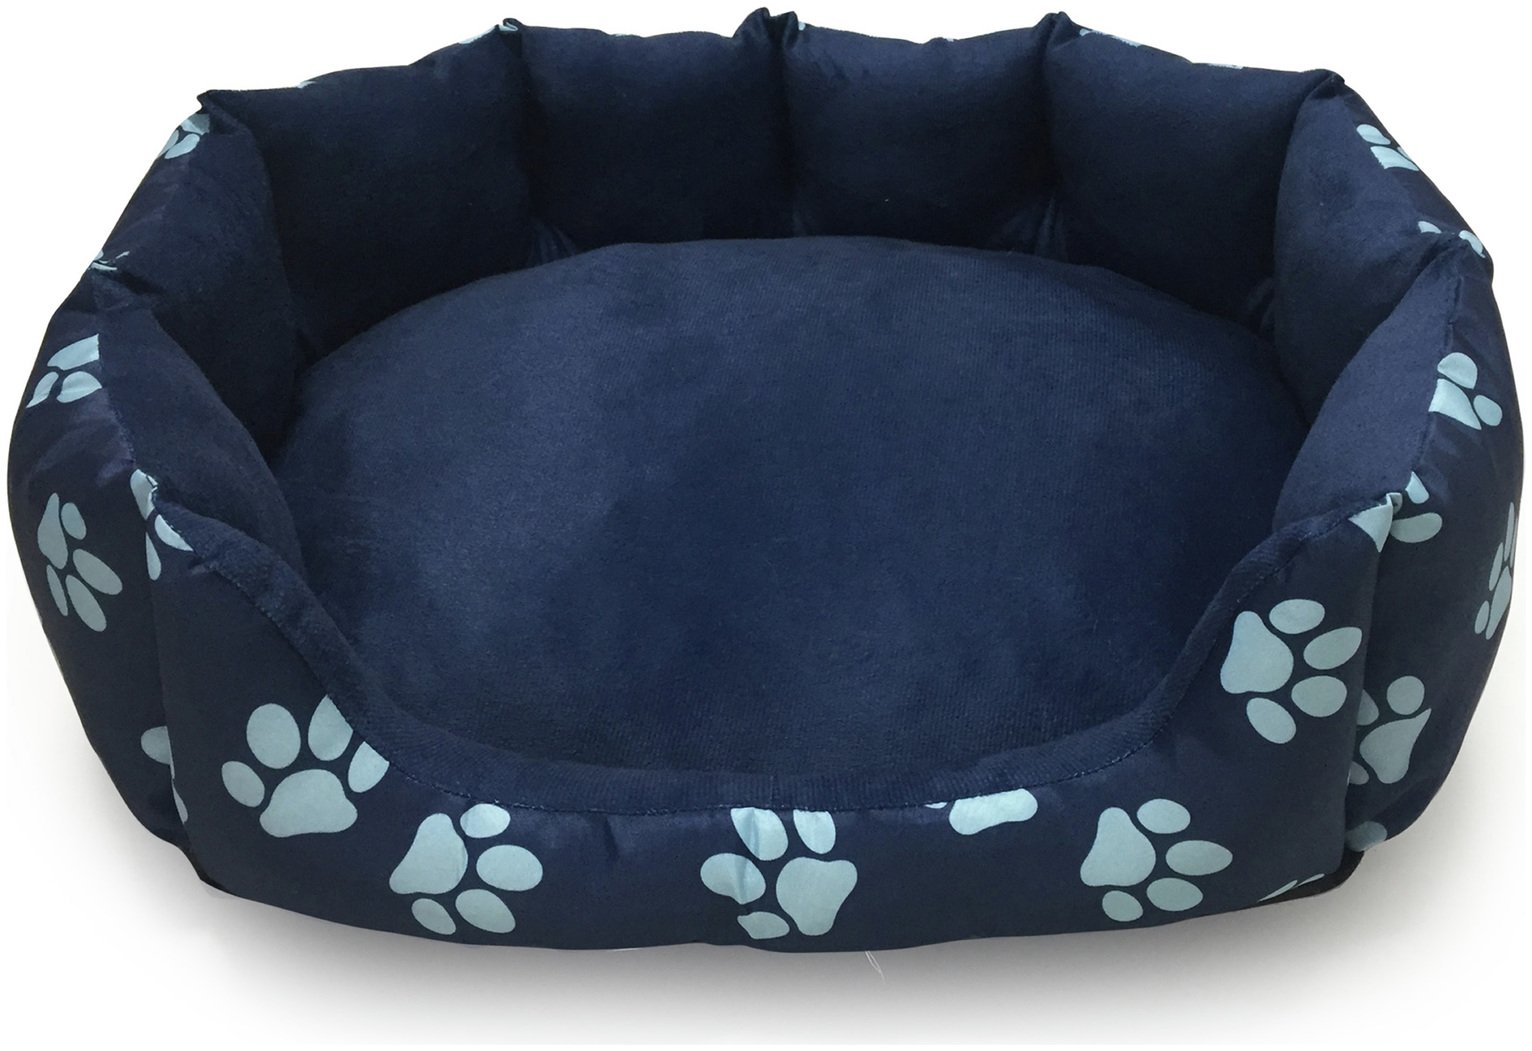 Paw Print Oval Navy Pet Bed - Large